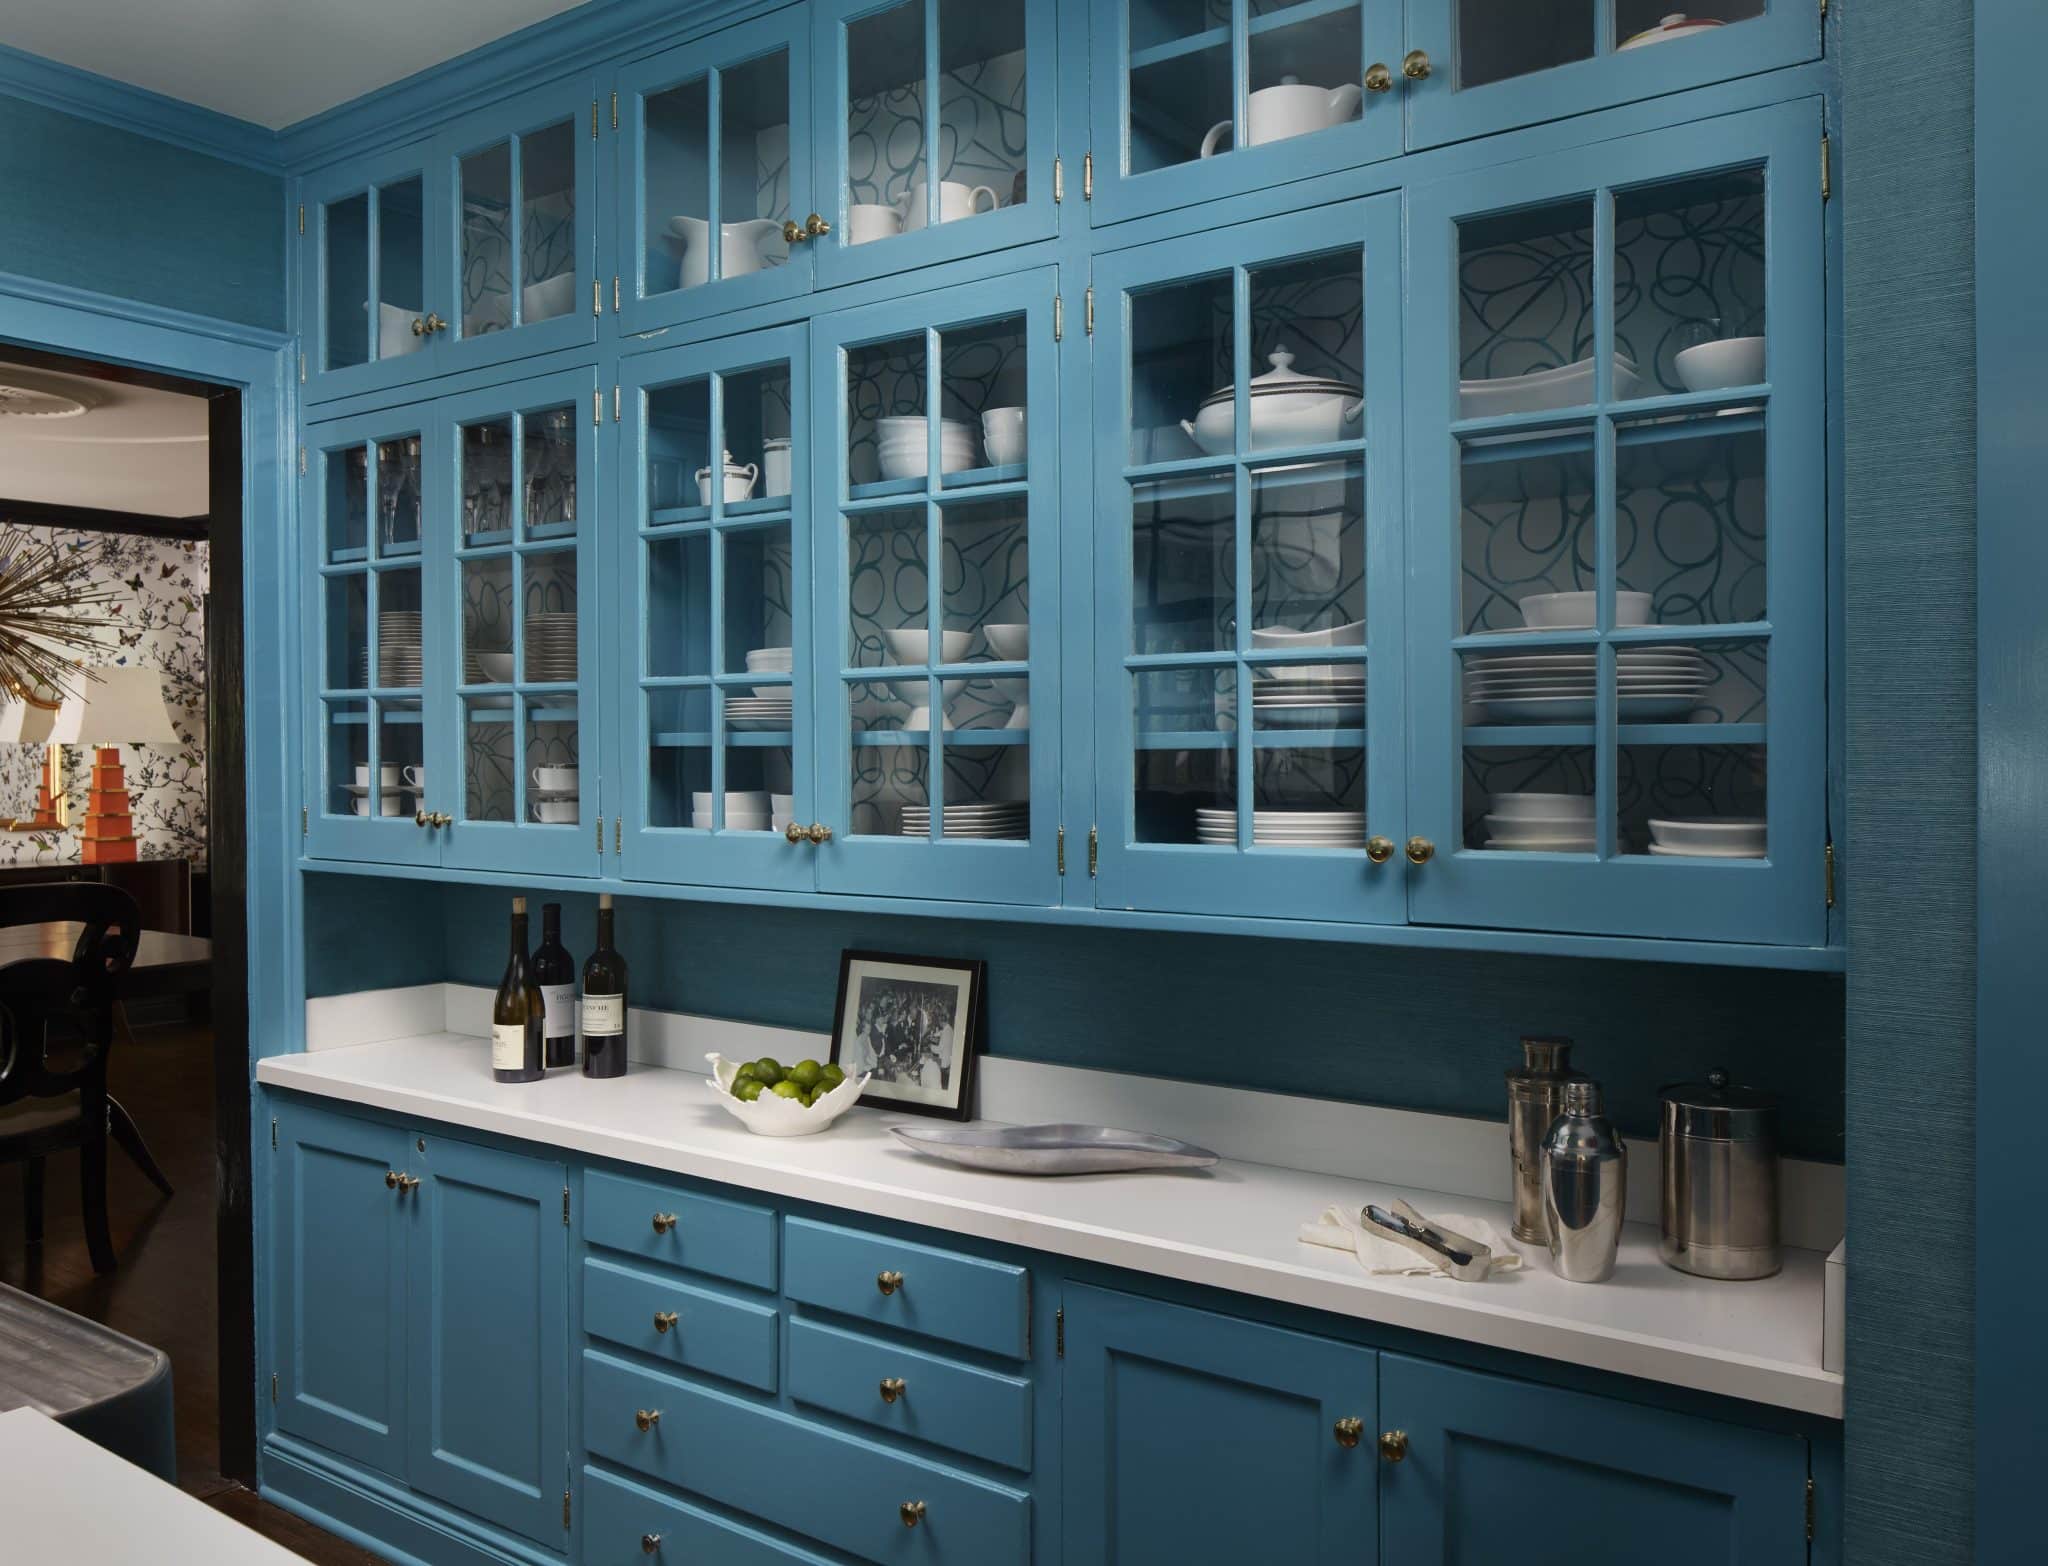 What Are the Latest Trends in Butler’s Pantry Cabinet Designs?